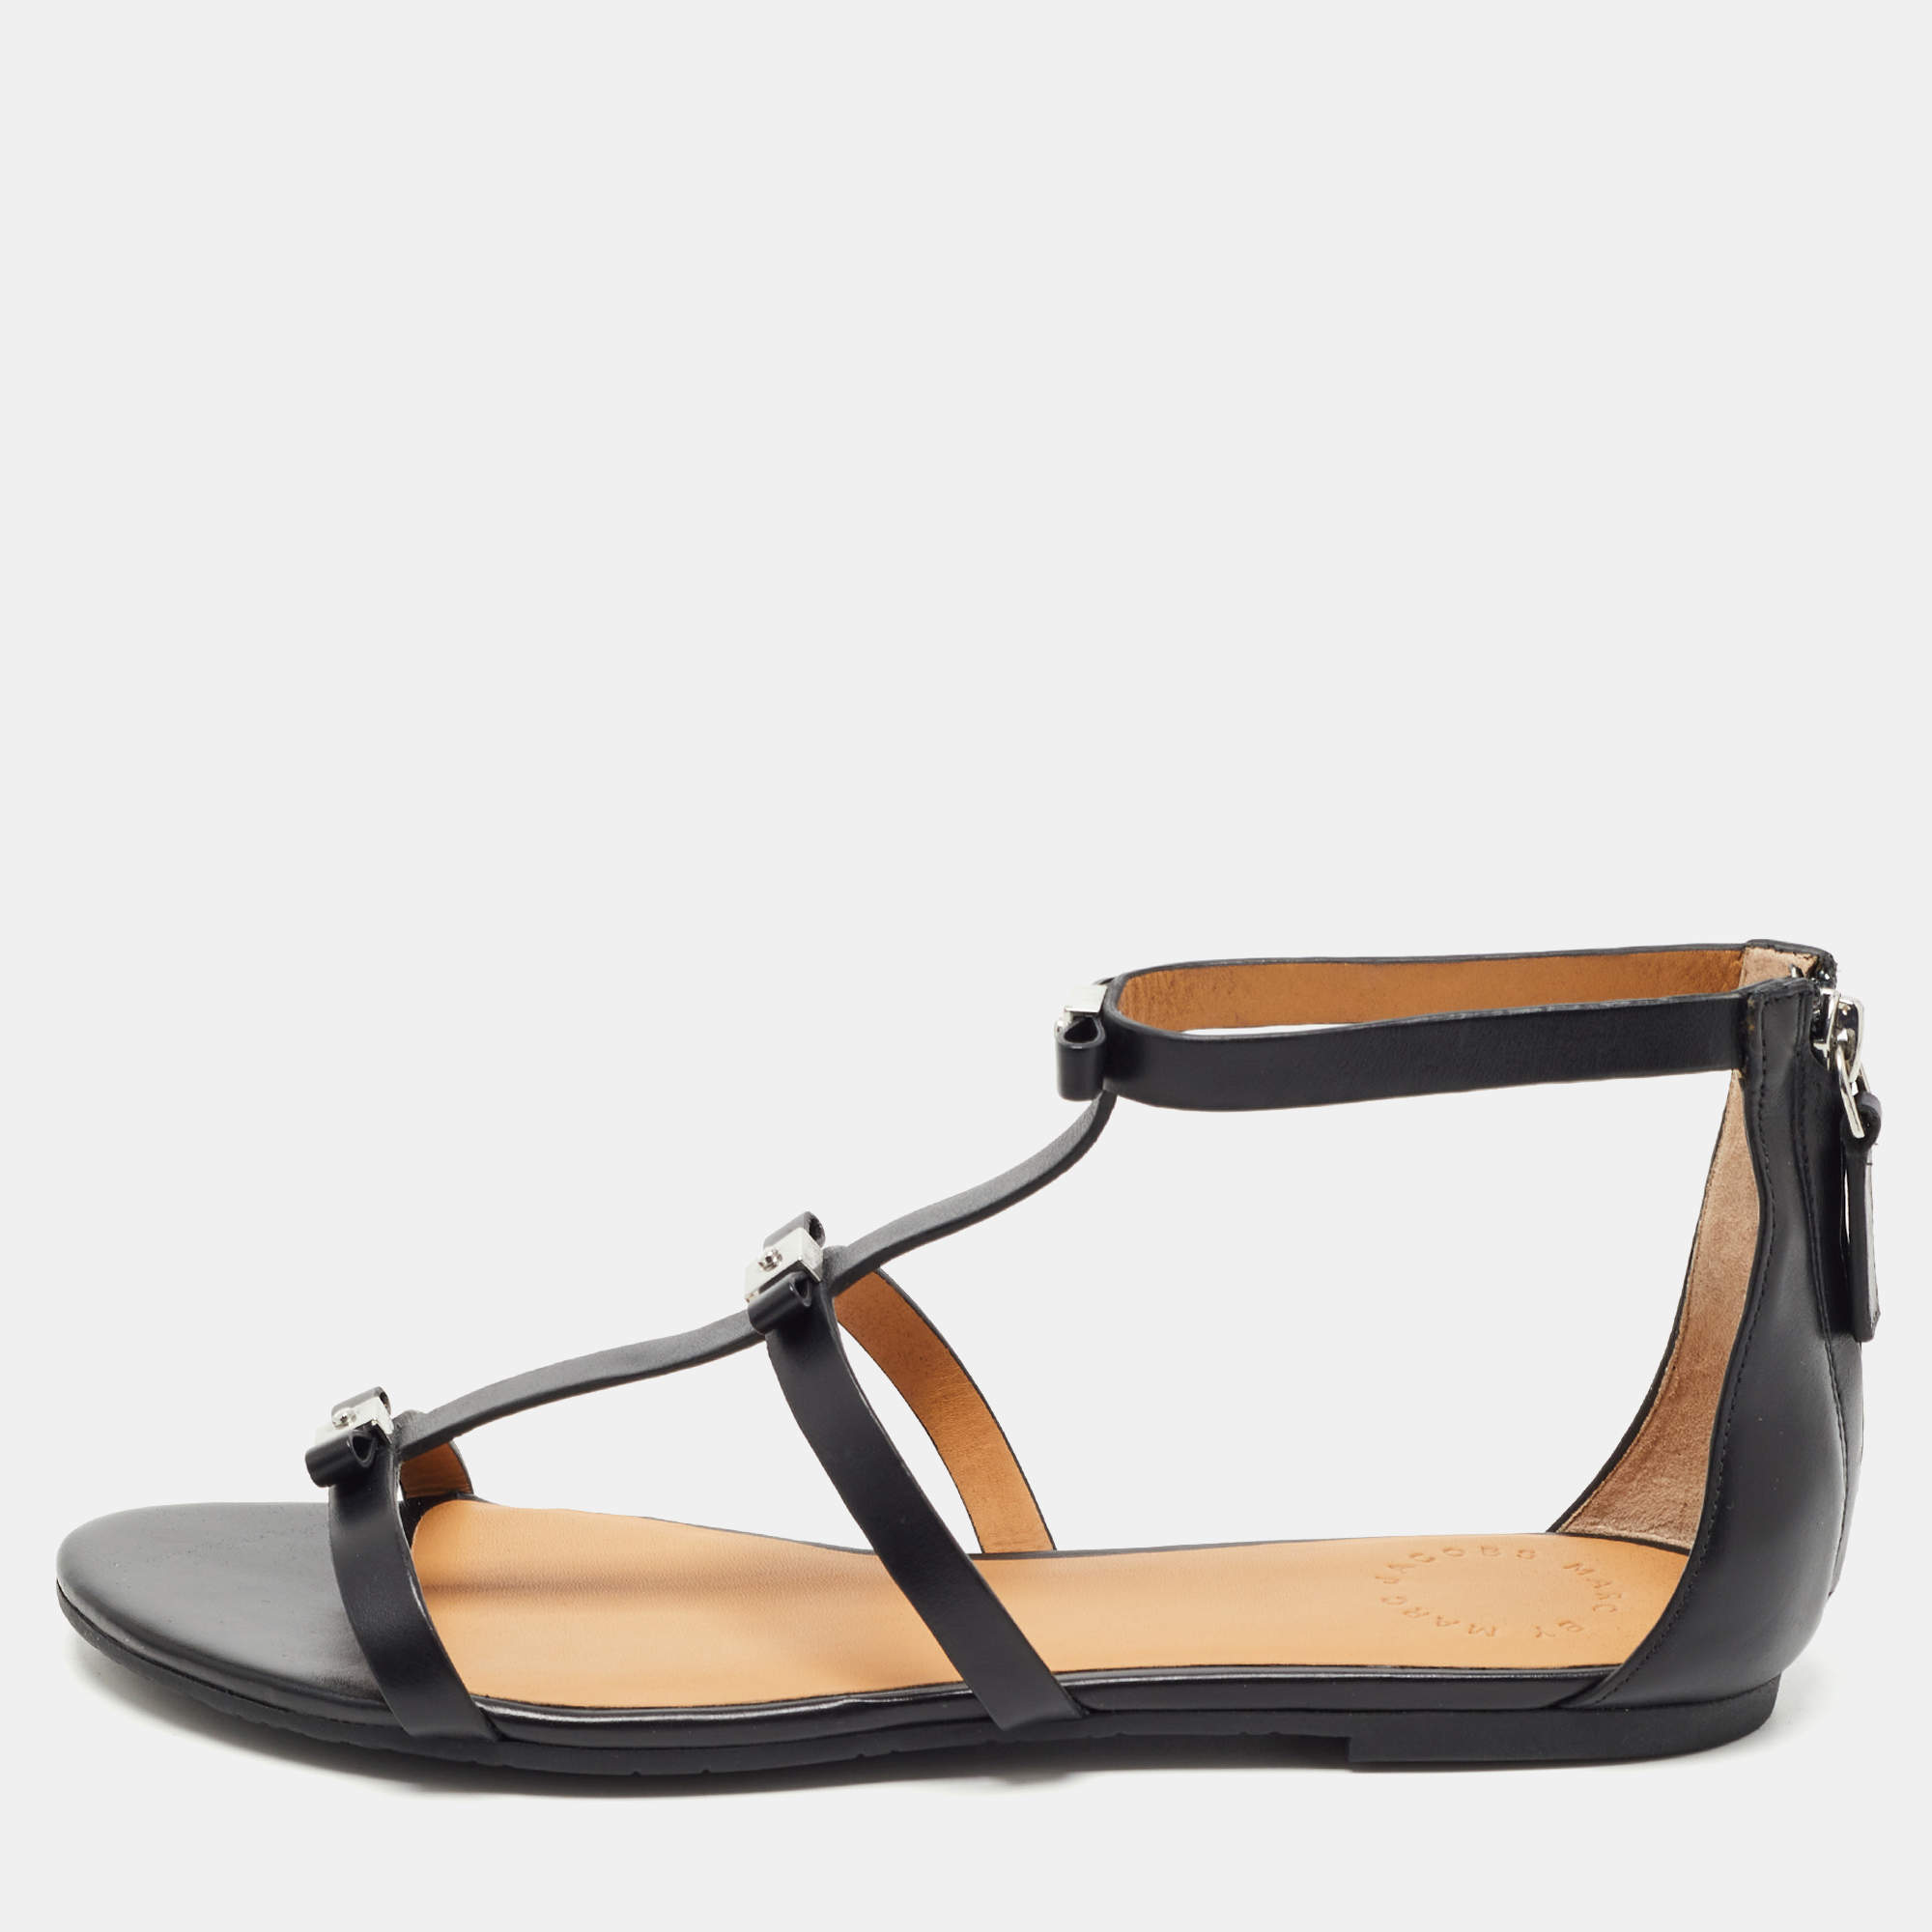 Marc by Marc Jacobs Black Leather Bow Flat Sandals Size 38